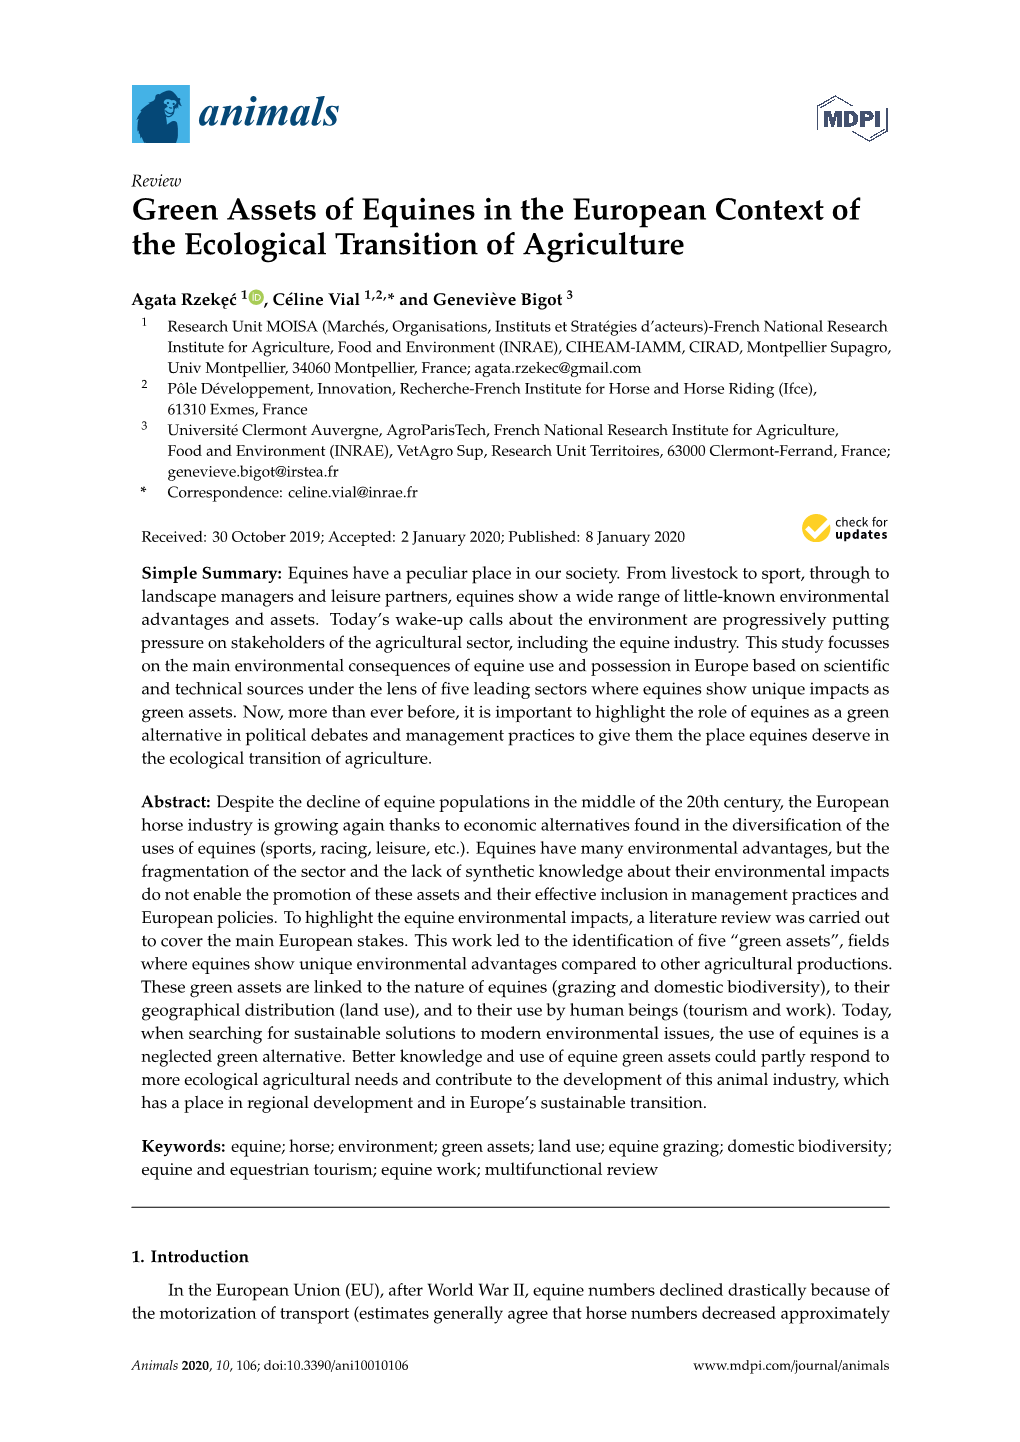 Green Assets of Equines in the European Context of the Ecological Transition of Agriculture